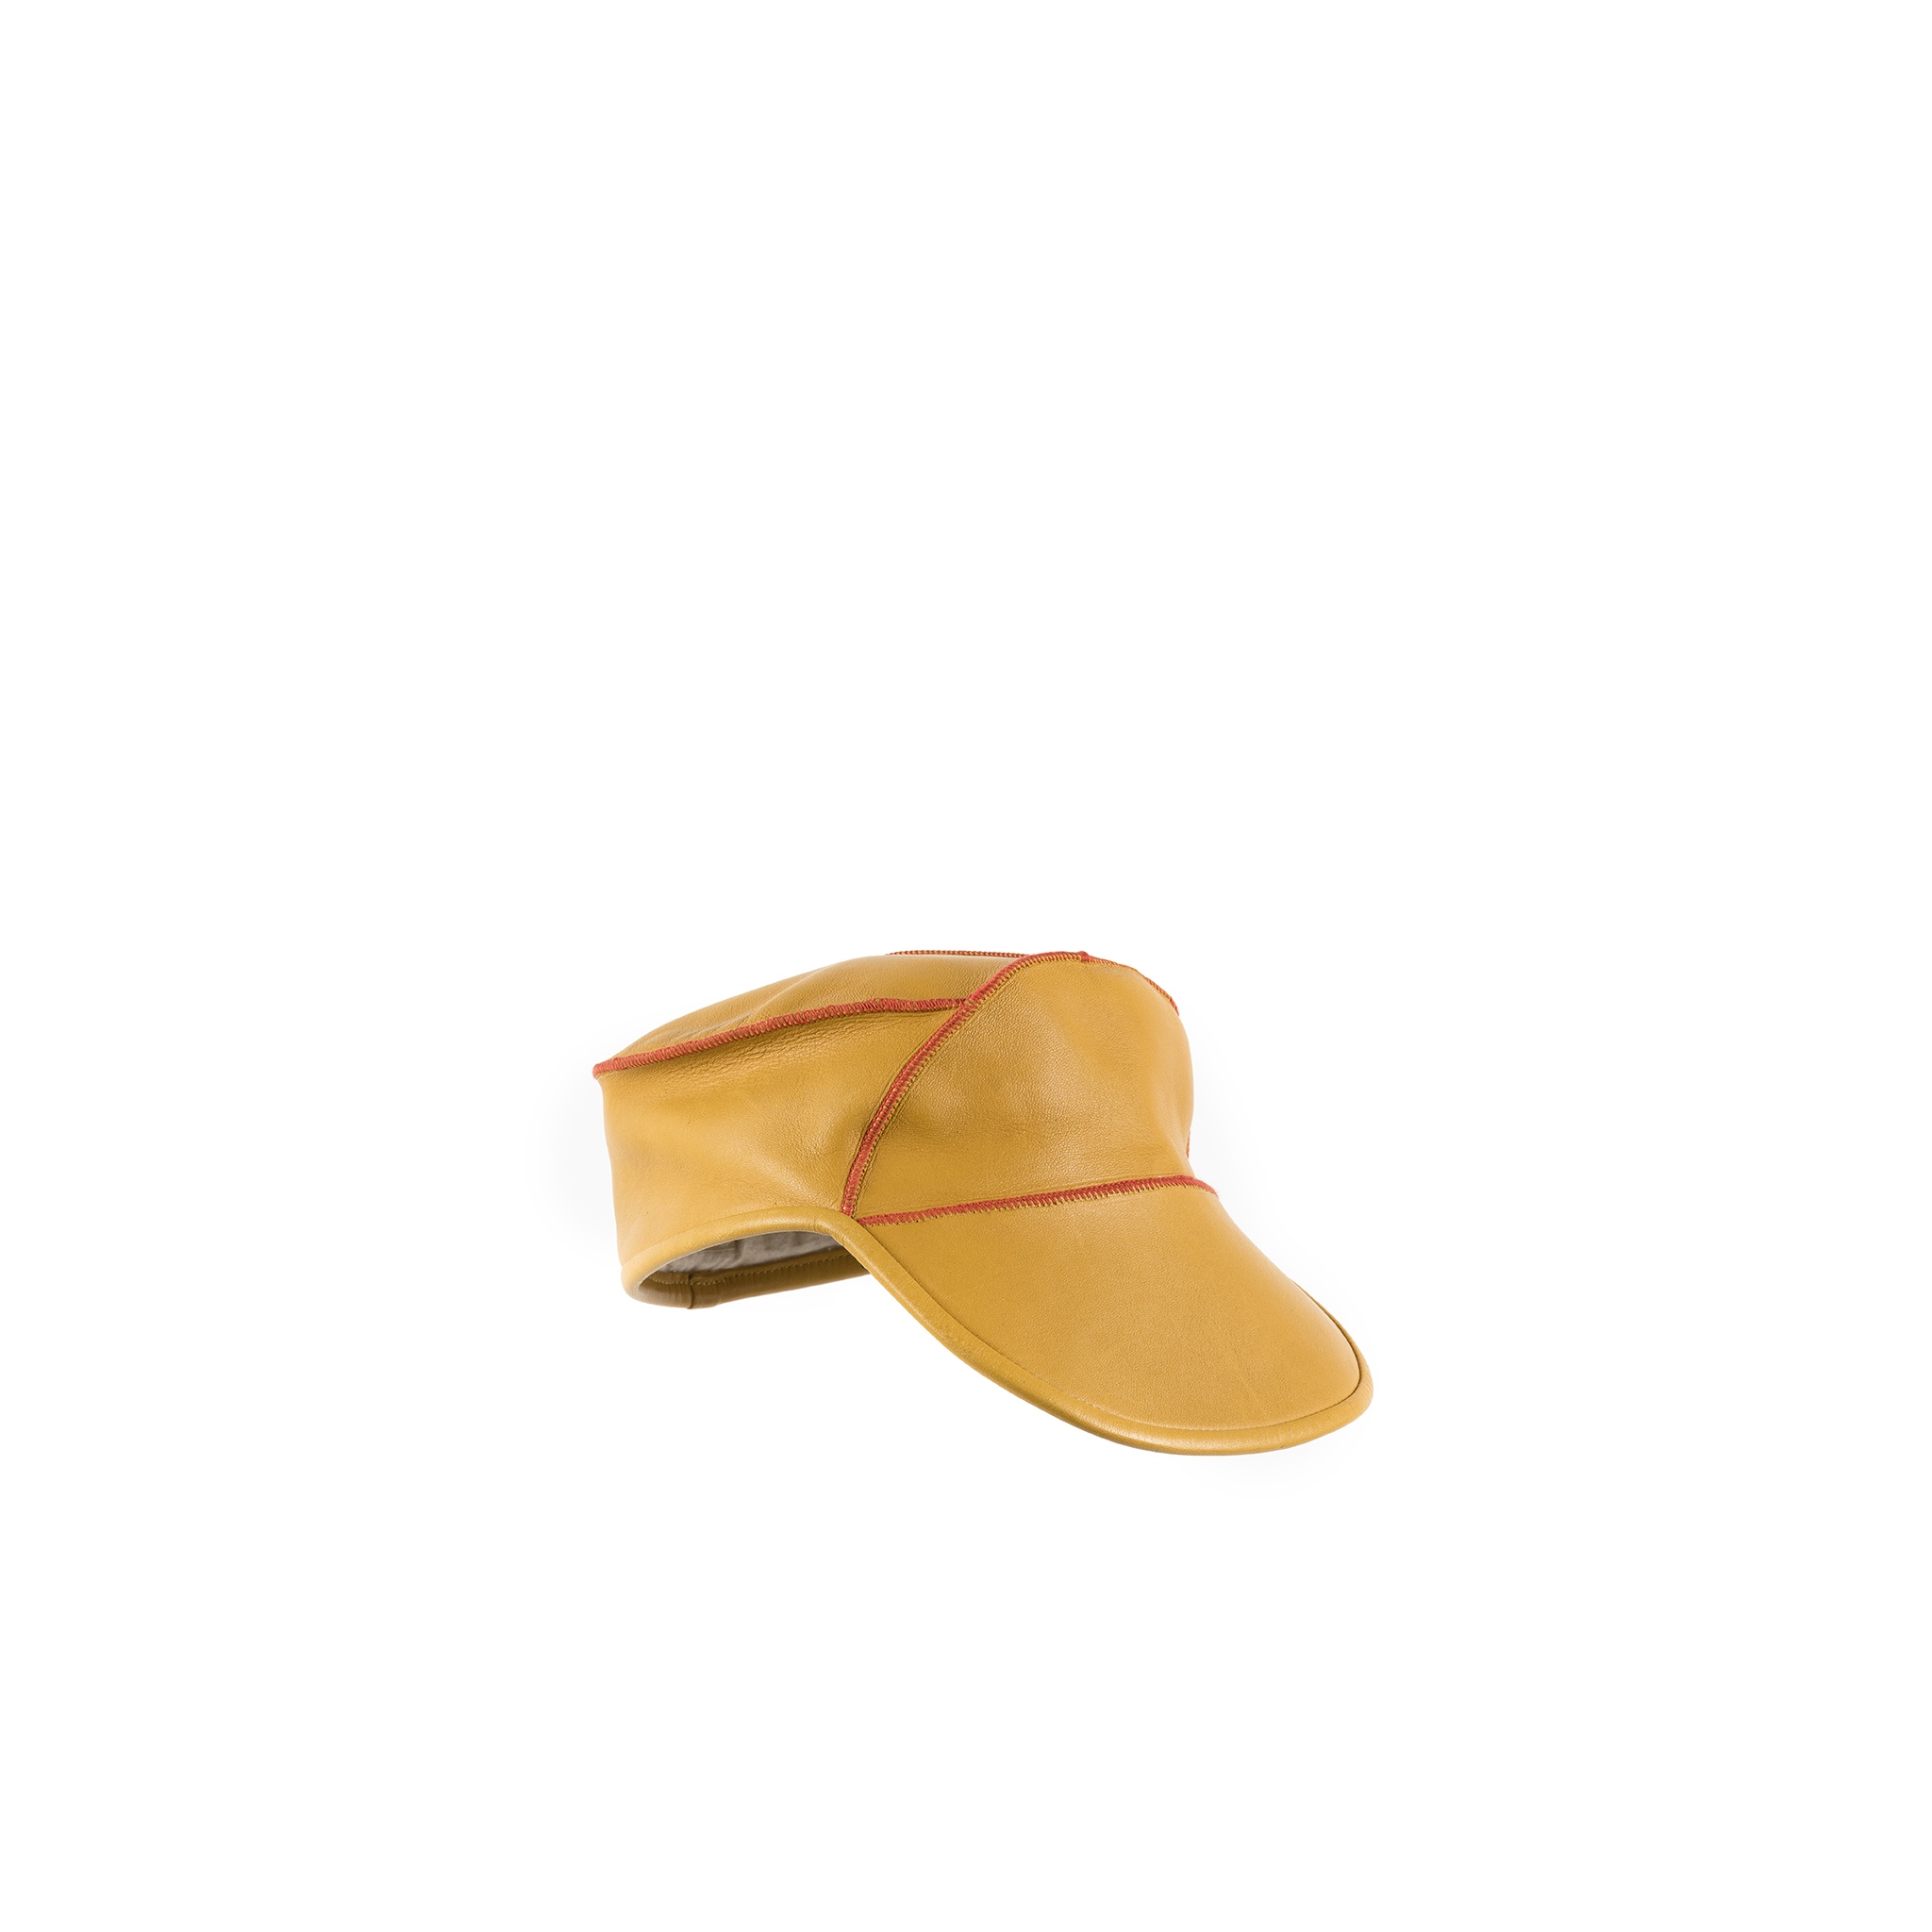 Chauffeur Cap - Glossy leather - Yellow color